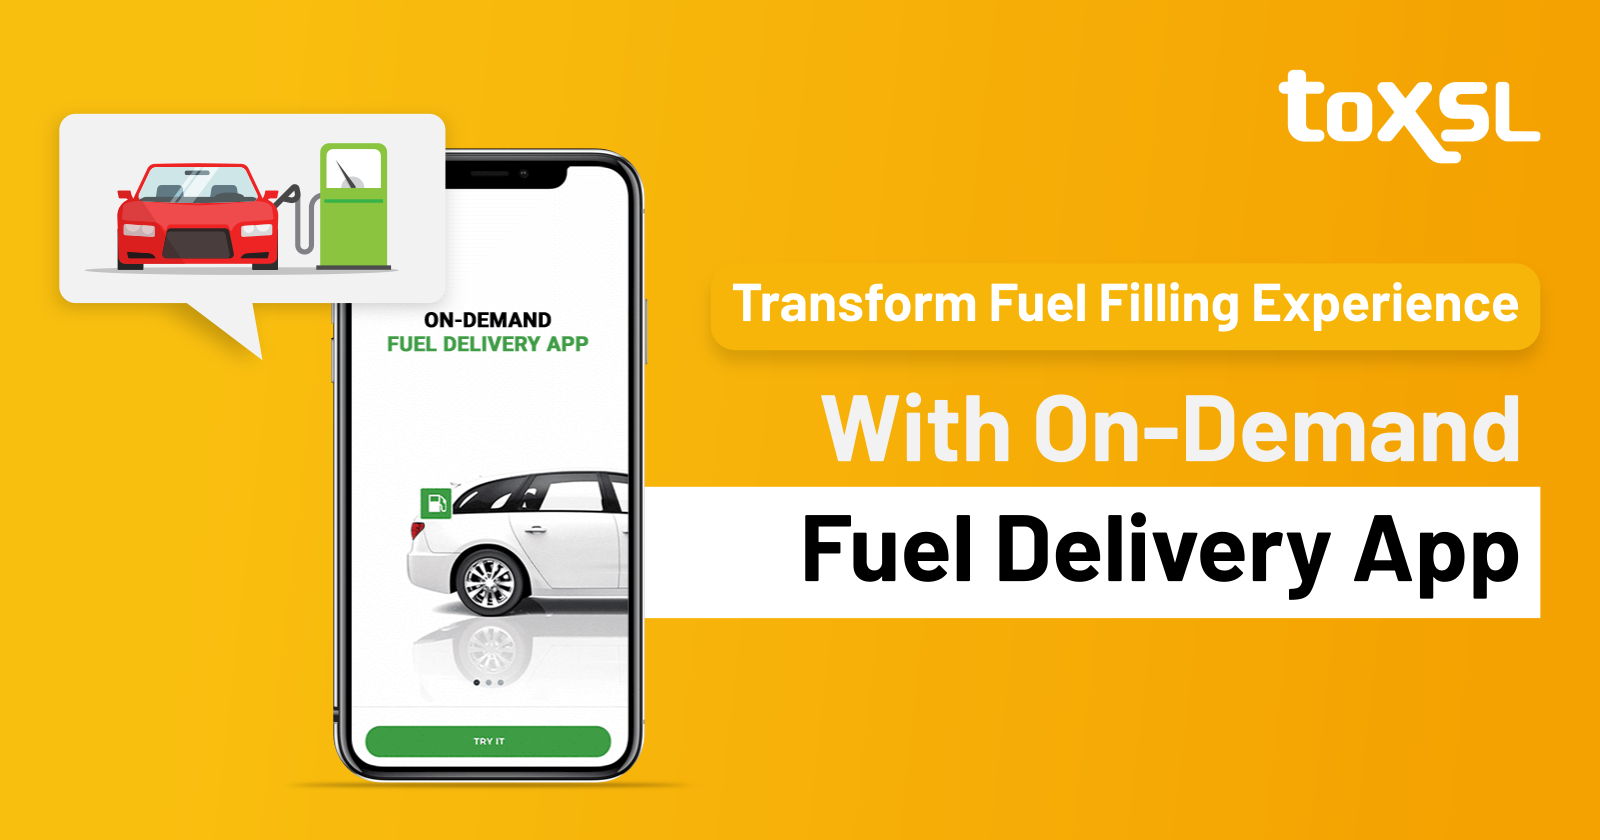 Transform Fuel Filling Experience with On-Demand Fuel Delivery App